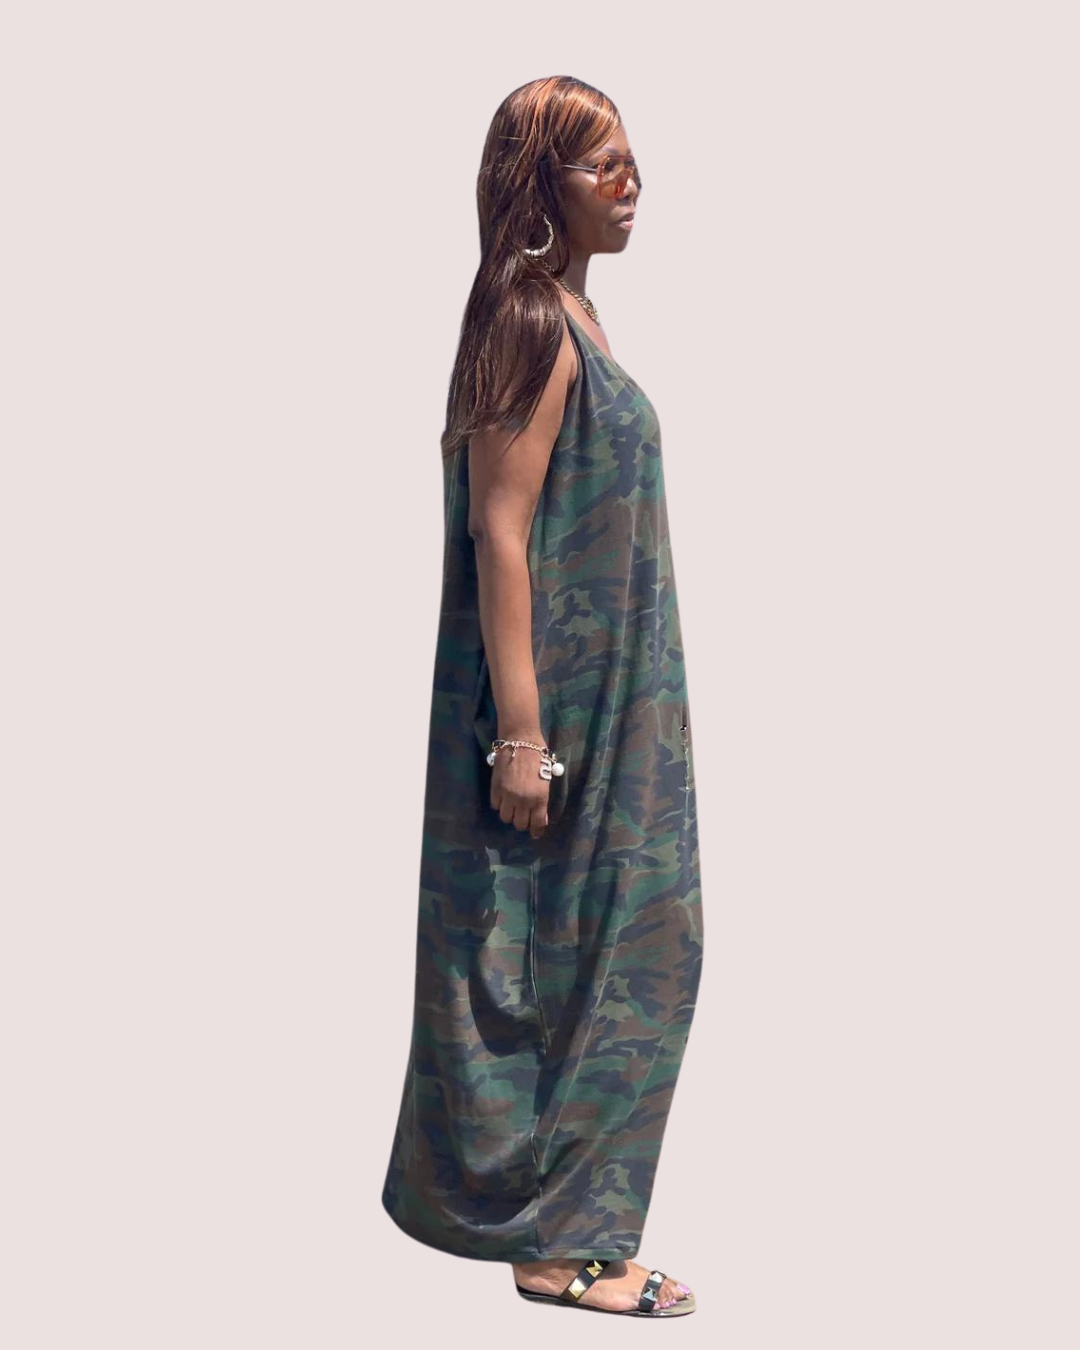 Camo Oversized Distressed Dress T Styles Online